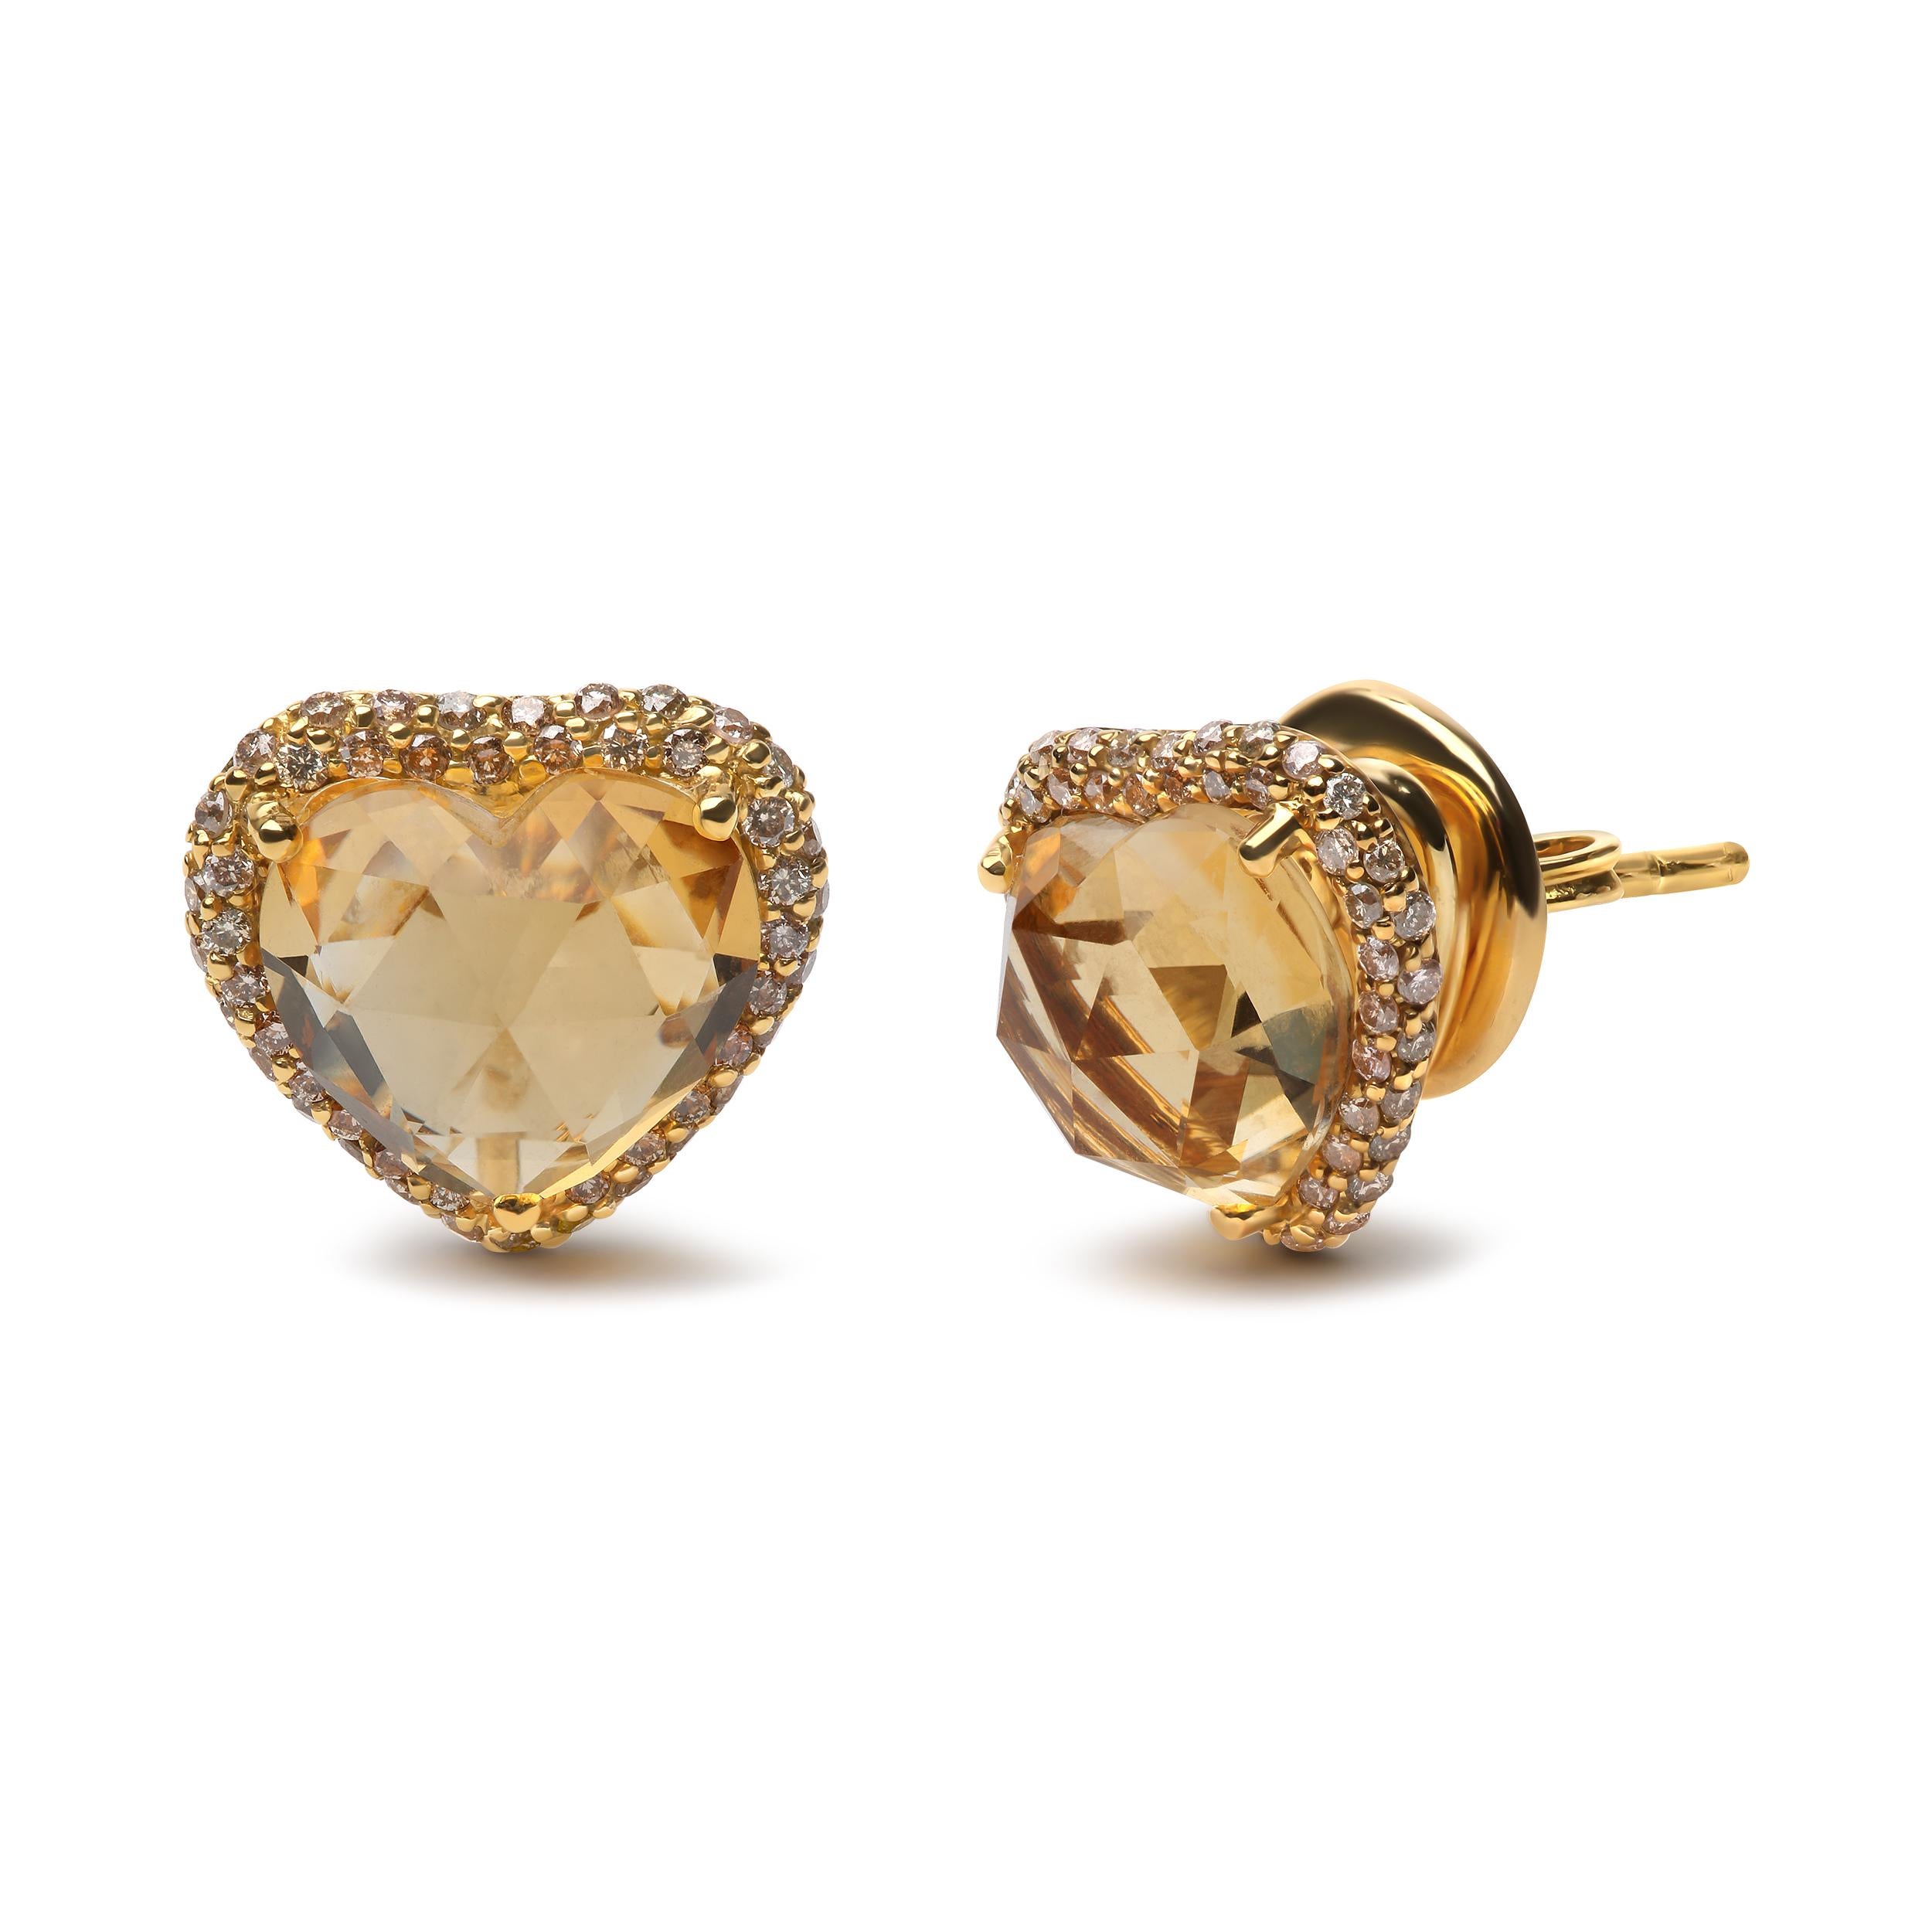 These dreamy 18k yellow gold stud earrings are so enchanting with a sunny heat-treated yellow 11x11mm heart-cut natural citrine gemstone in a 3-prong setting surrounded by a halo of round, heat-treated brown diamonds in prong settings. These warm,